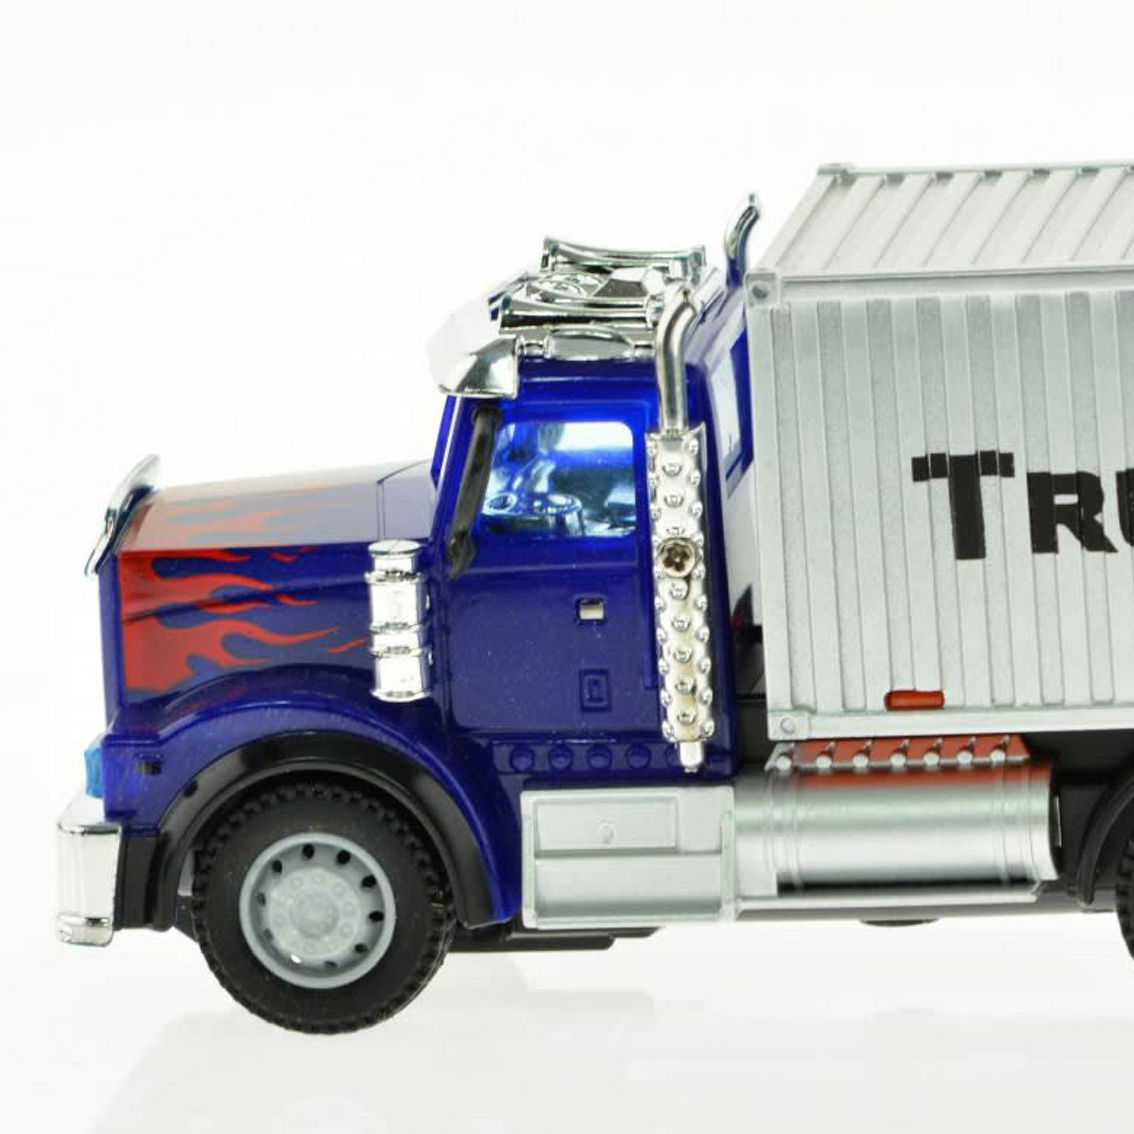 CIS-AG56162B2 2.4G 1:64 RC Transportation container Truck with lights and sound - Image 2 of 5